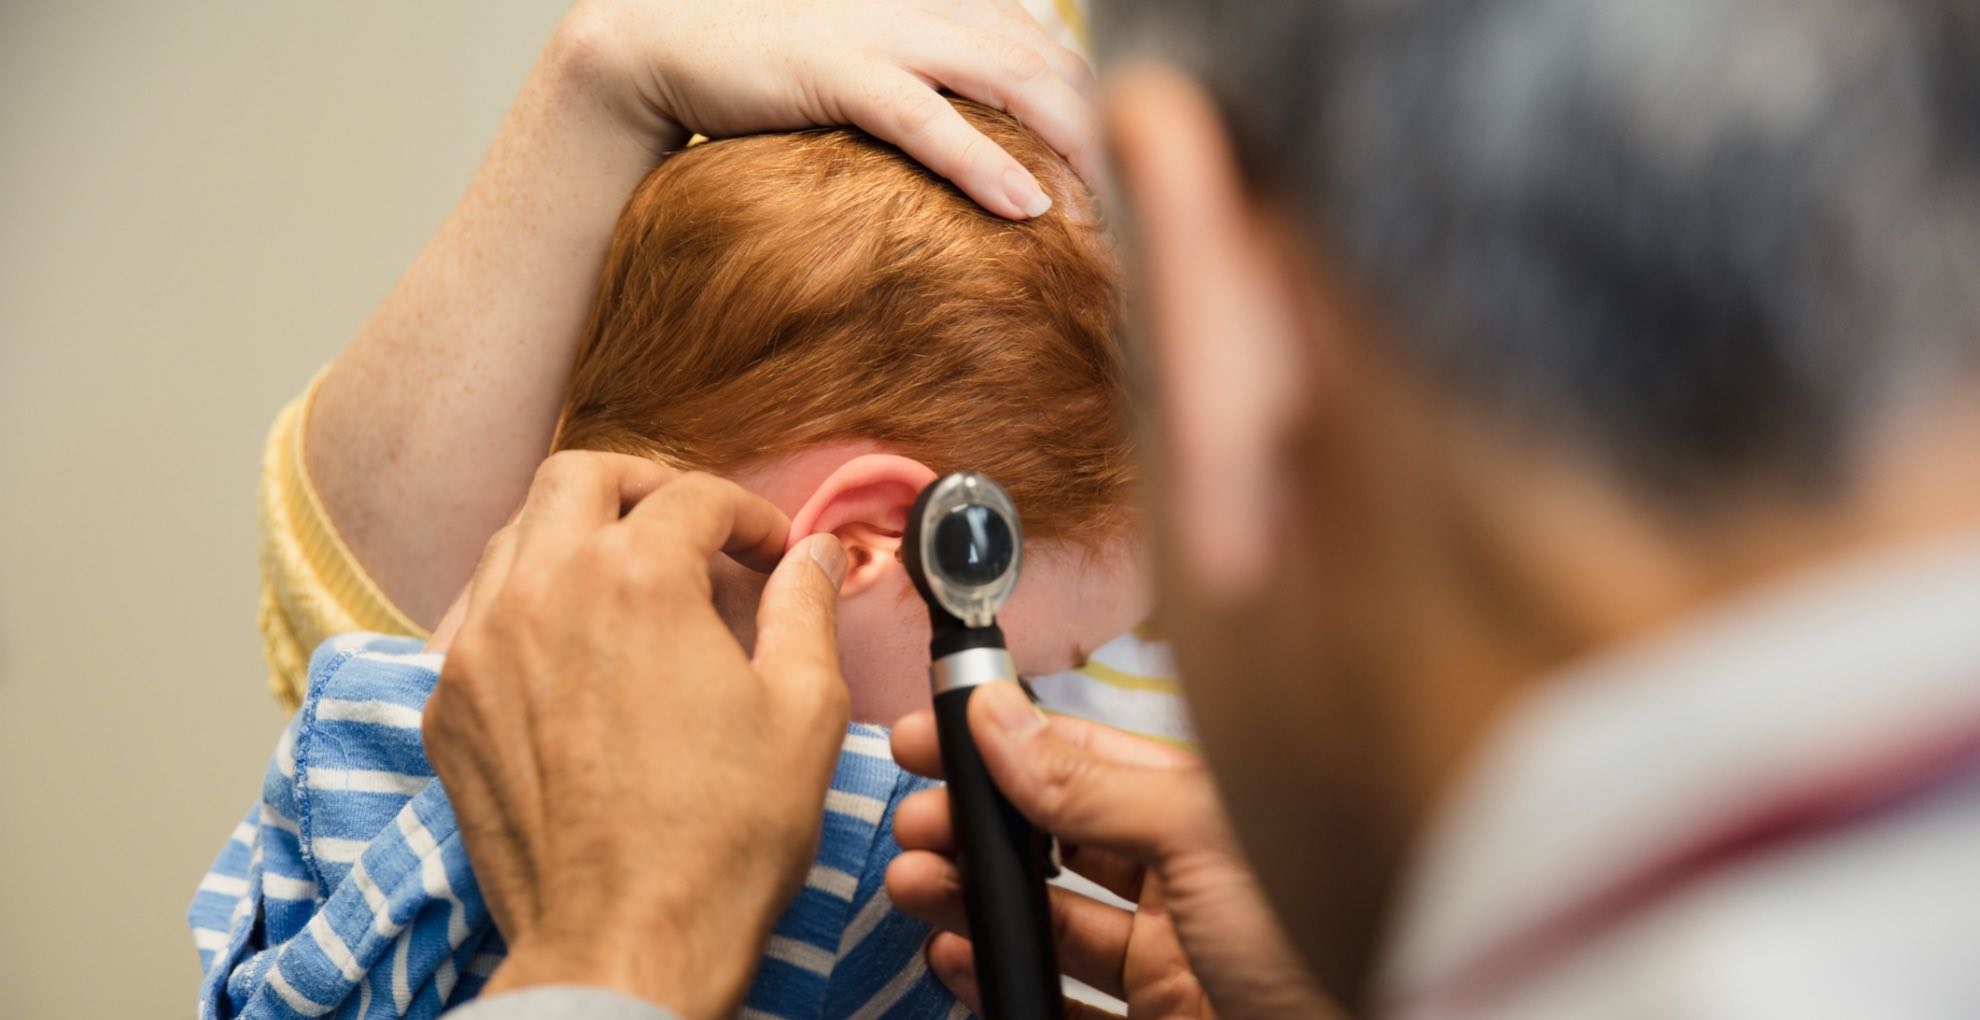 Some experts say that ear infections are often misdiagnosed.